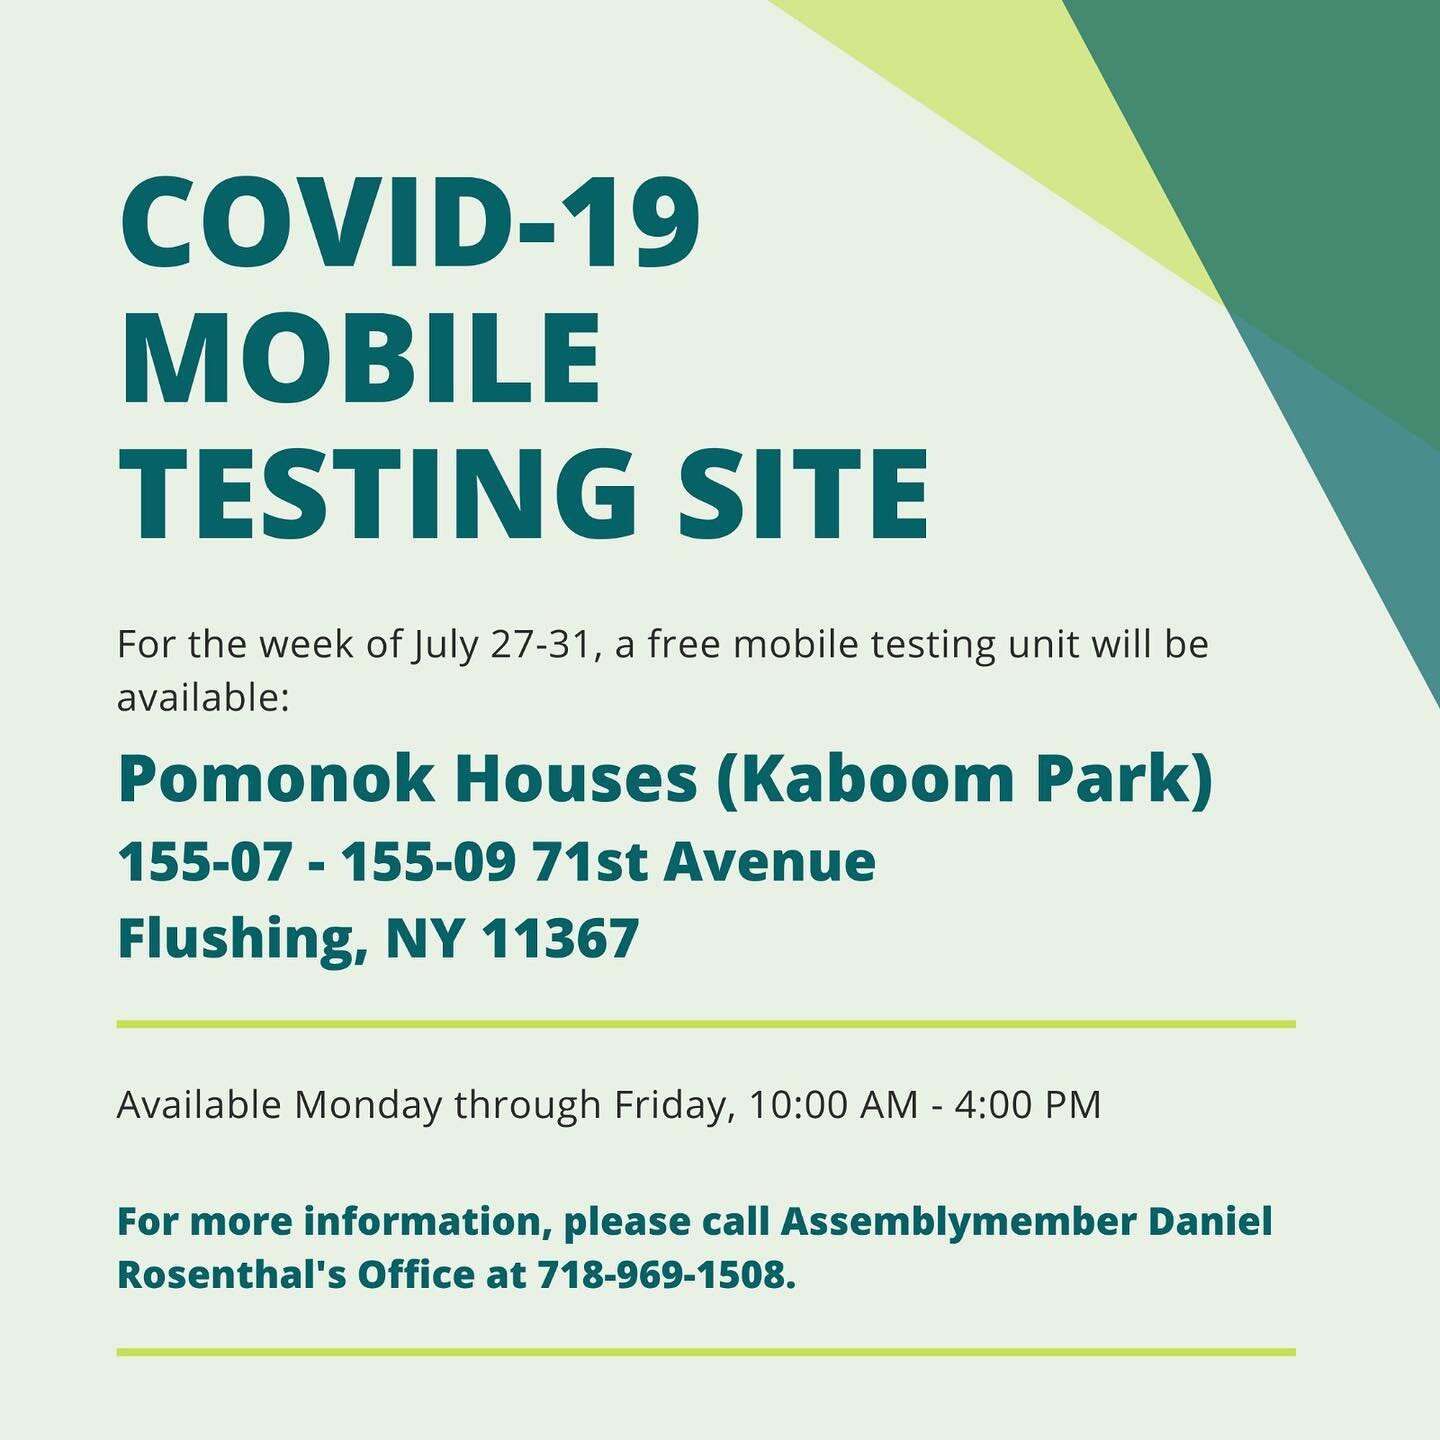 If you&rsquo;re in need of a COVID-19 Diagnostic Test, there is a free mobile testing unit located near Kaboom Park in Pomonok. No appointment required and they are available Monday - Friday of this week. 

#pomonok #AD27 #danielrosenthal #mobiletest